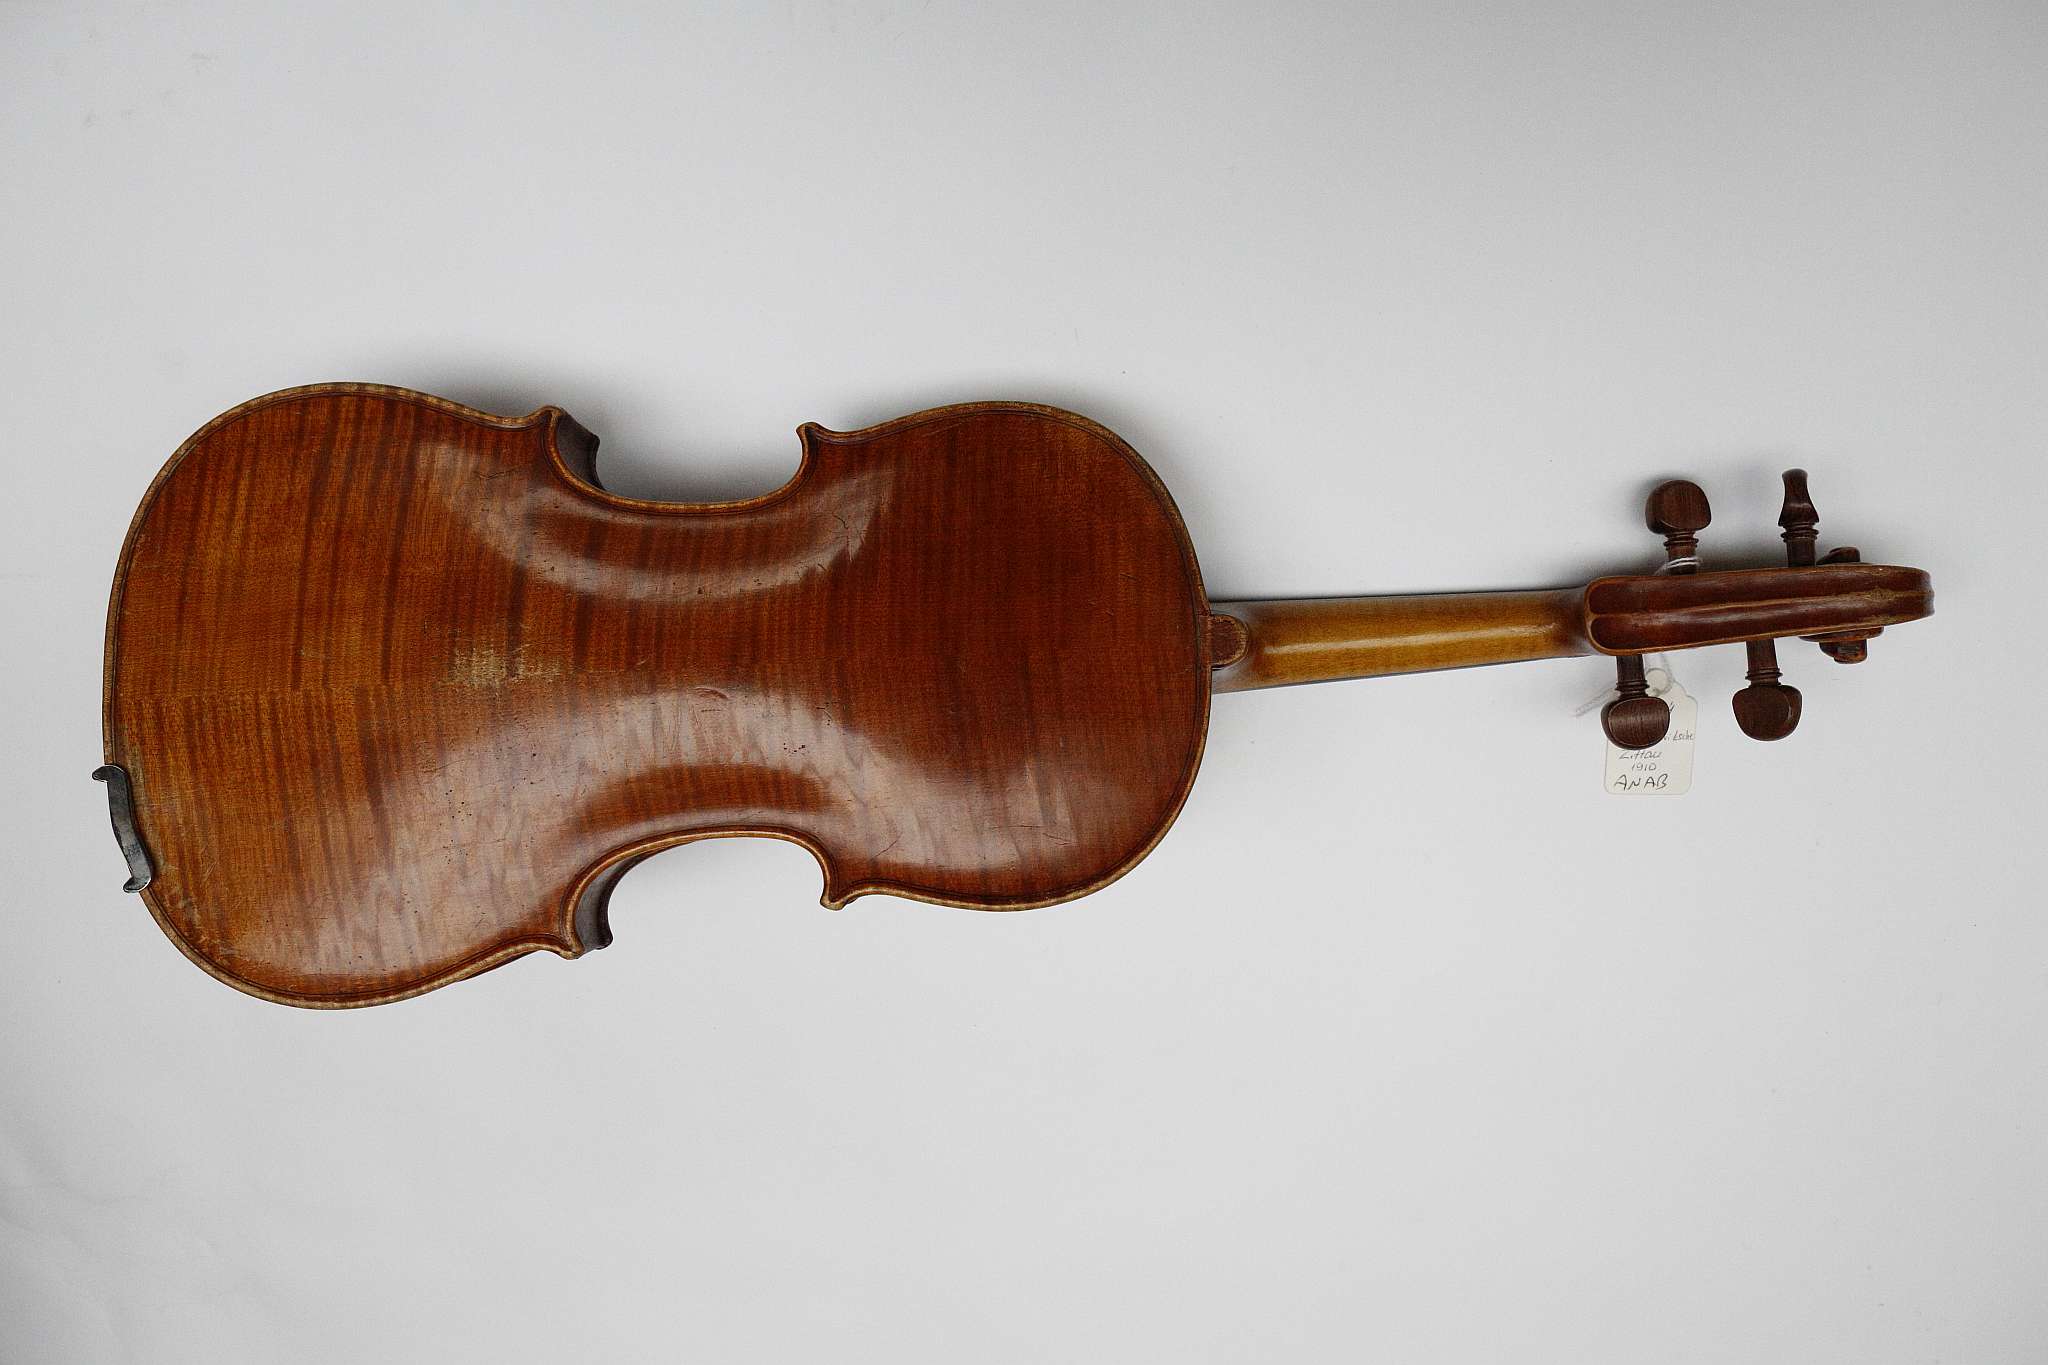 A German violin c.1910, (Karl ad Fritsche, Zitau), with E string, fine tuner on ebony tail piece and - Image 6 of 6